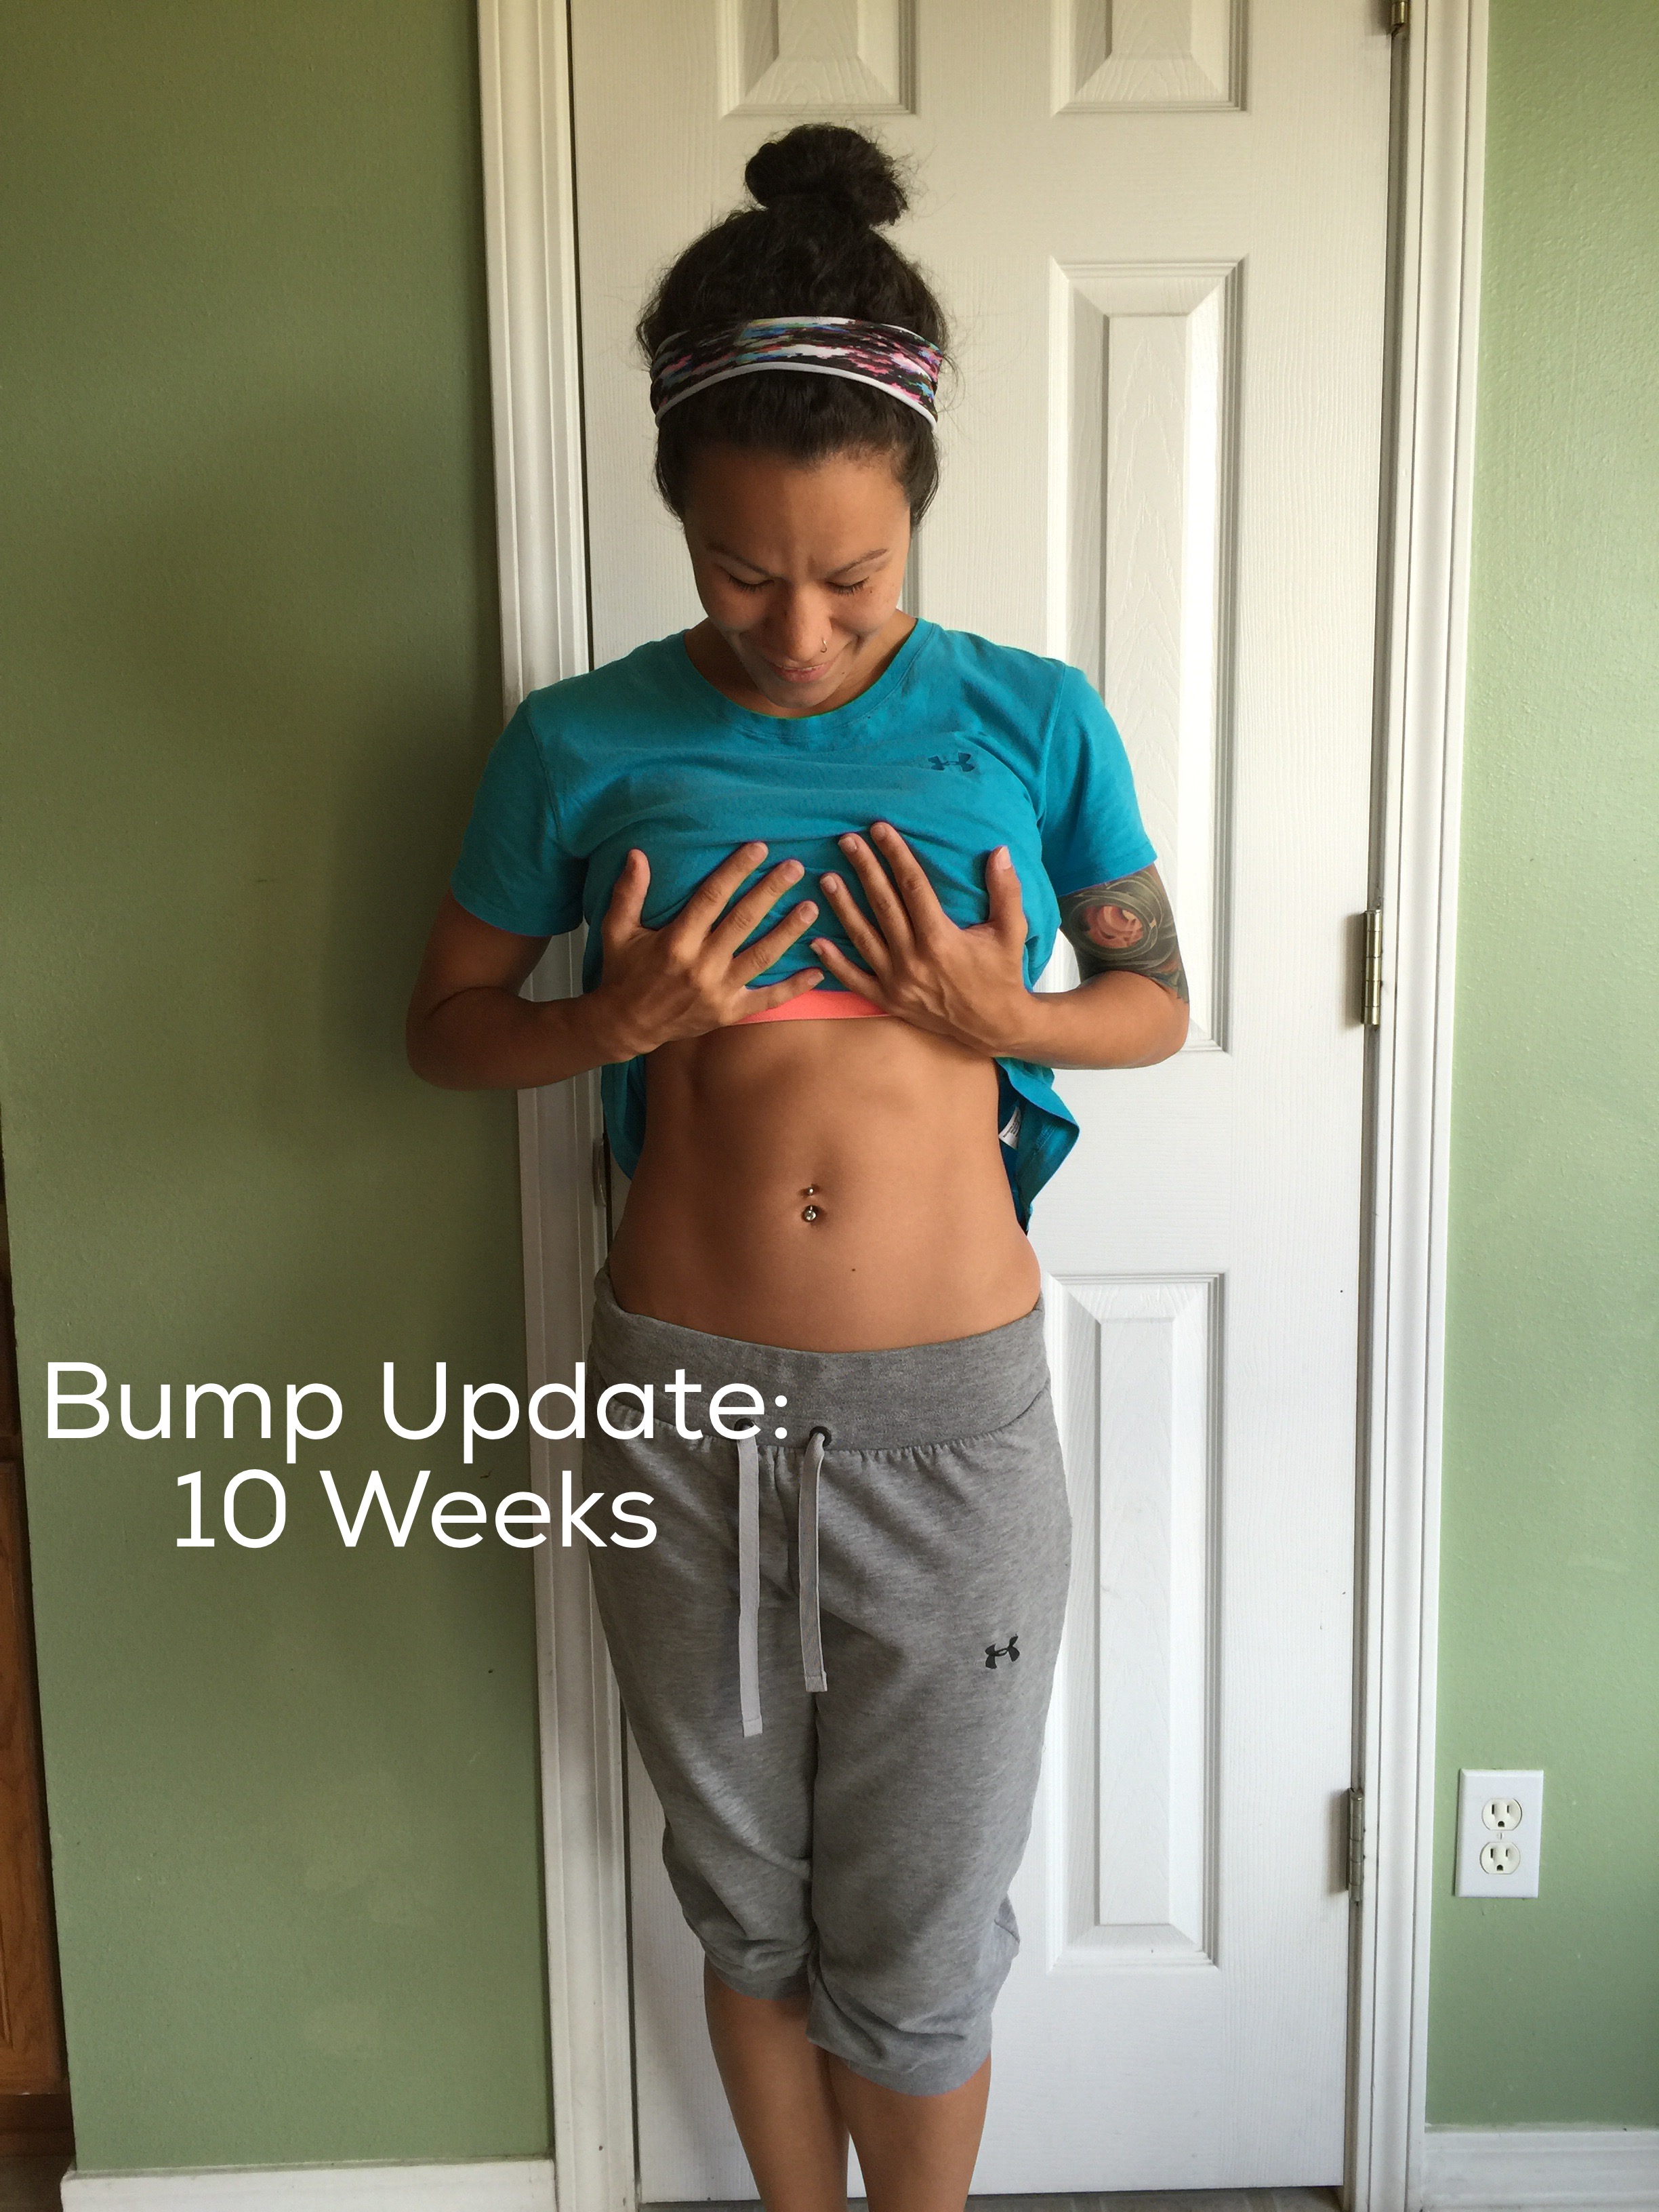 Pregnancy 10 Week Bump Update Diary Of A Fit Mommy